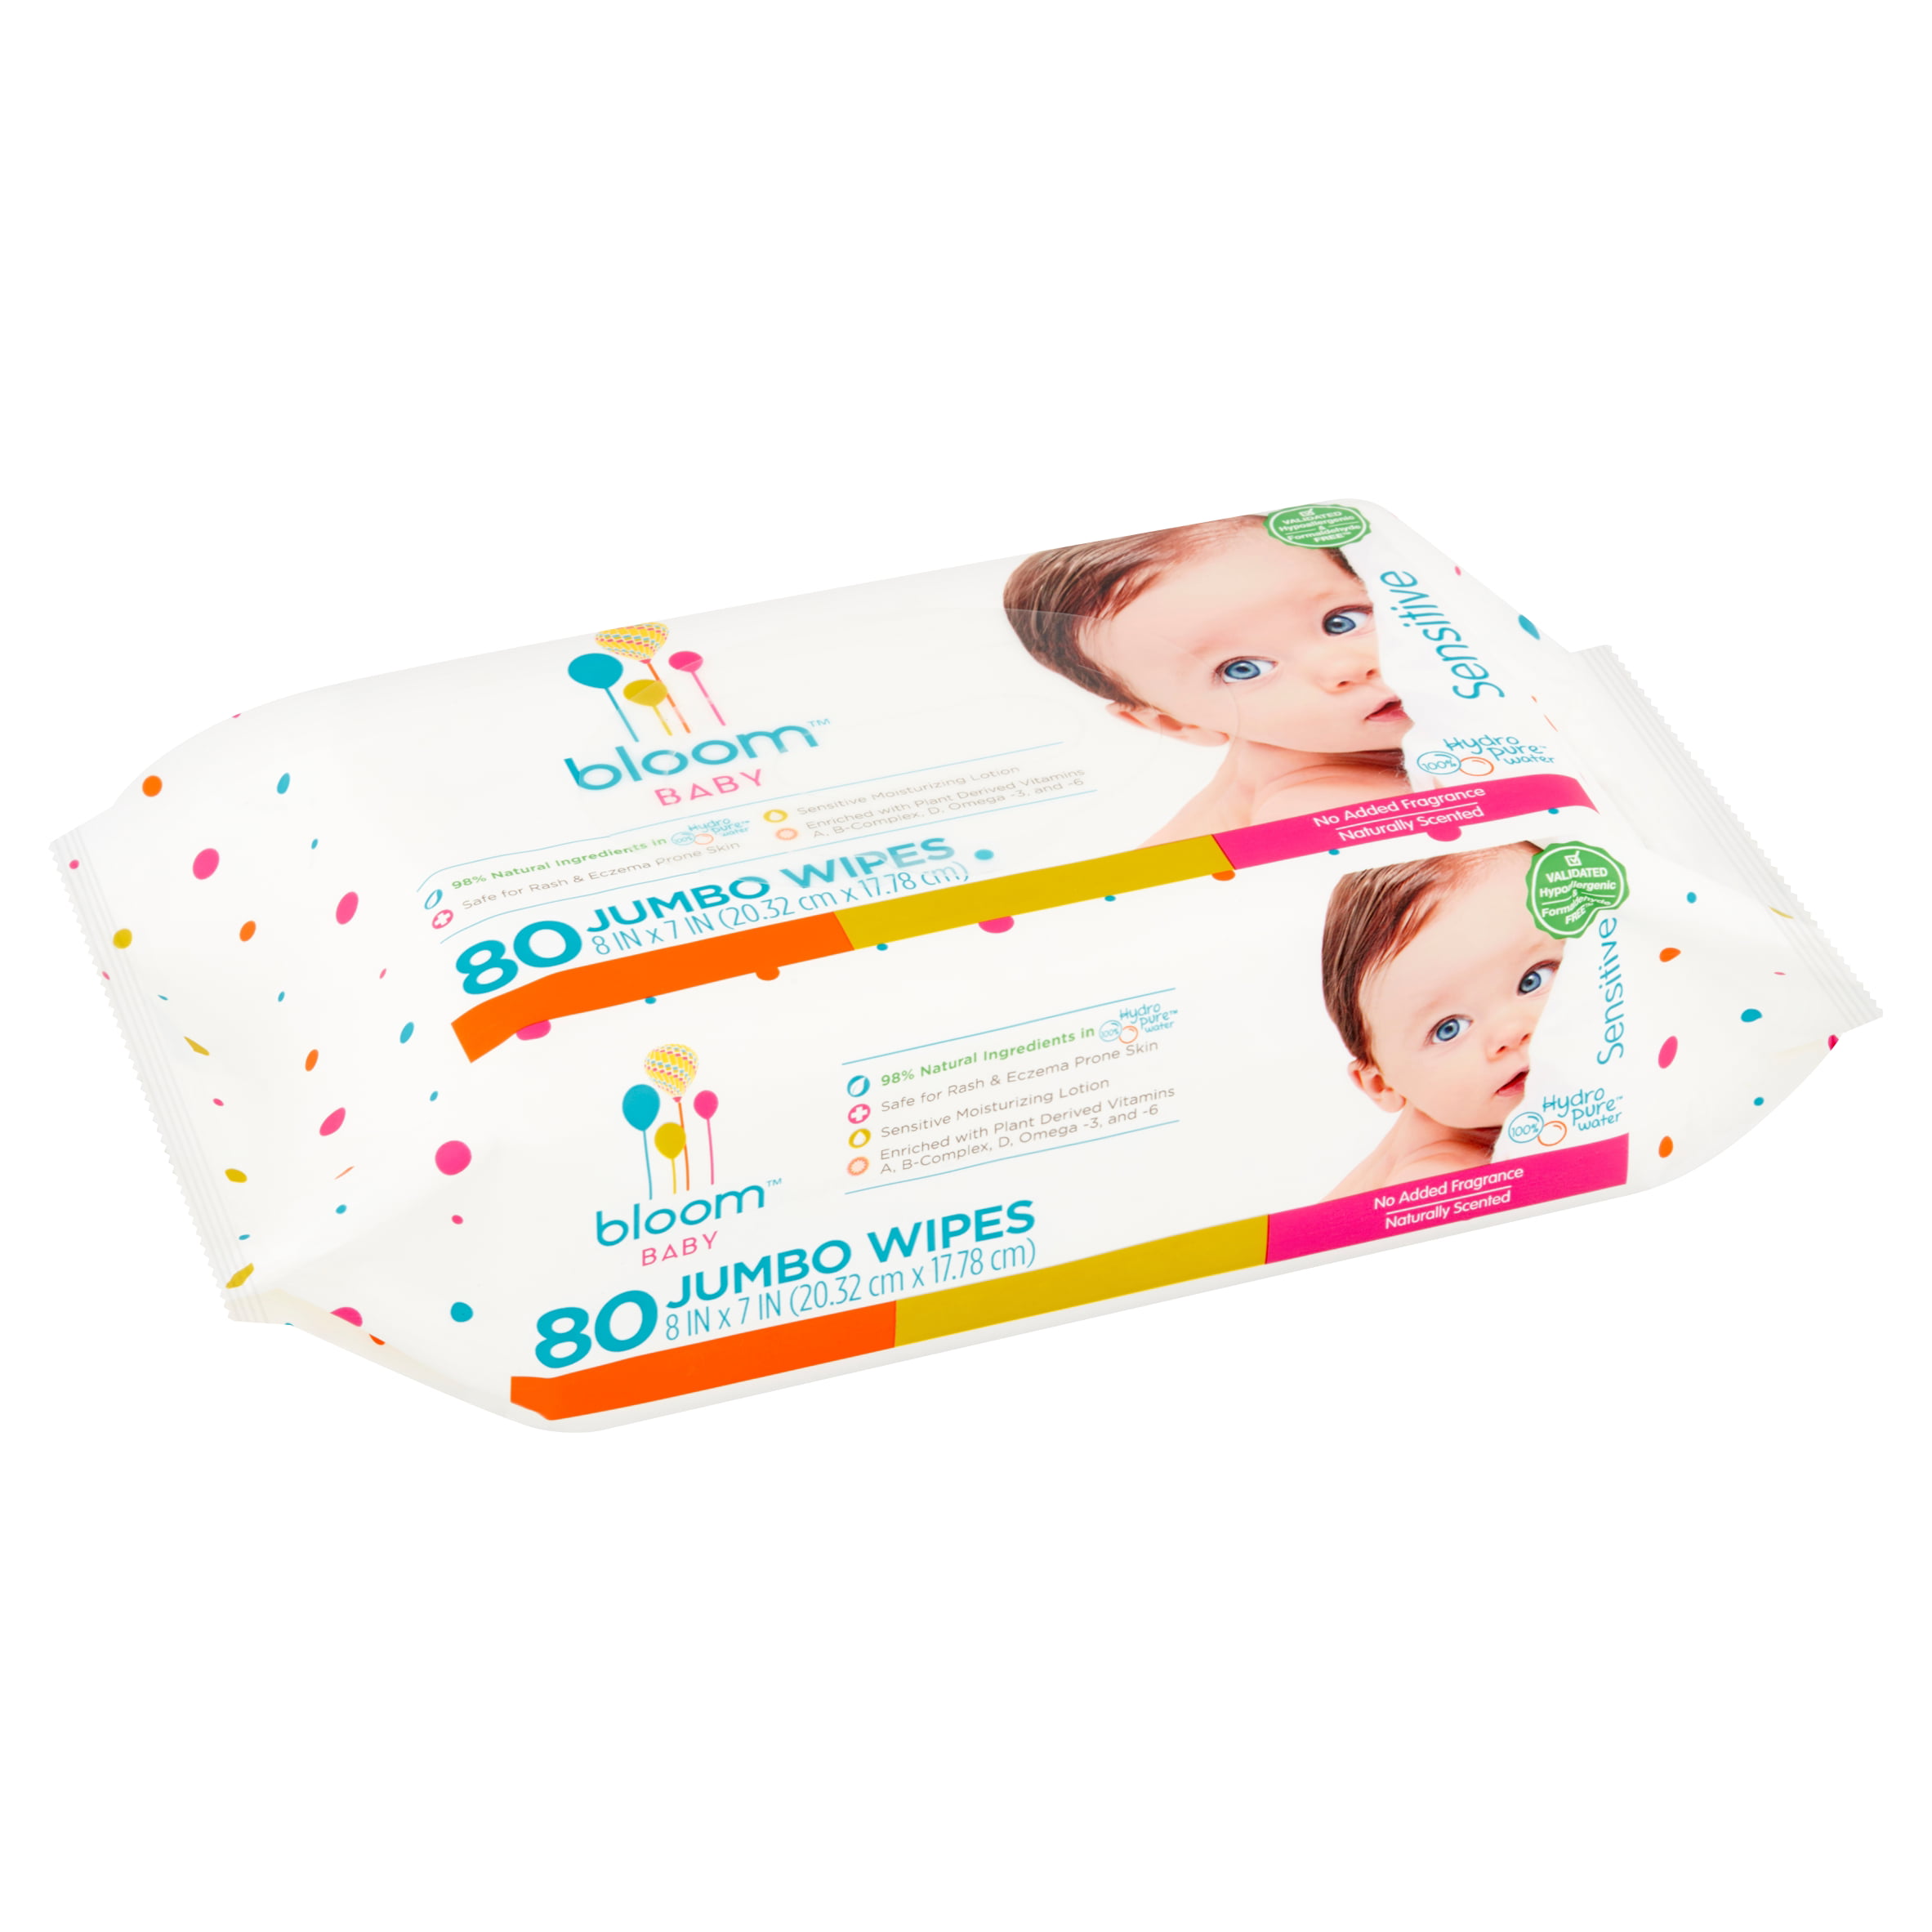 Formulated for Diaper Area Infused with Plant-Derived Vitamins Textured & Thick 8”x7” Wipes Hypoallergenic Water-Based 20 Count Baby Wipes by Bloom Baby for Sensitive Skin Unscented 